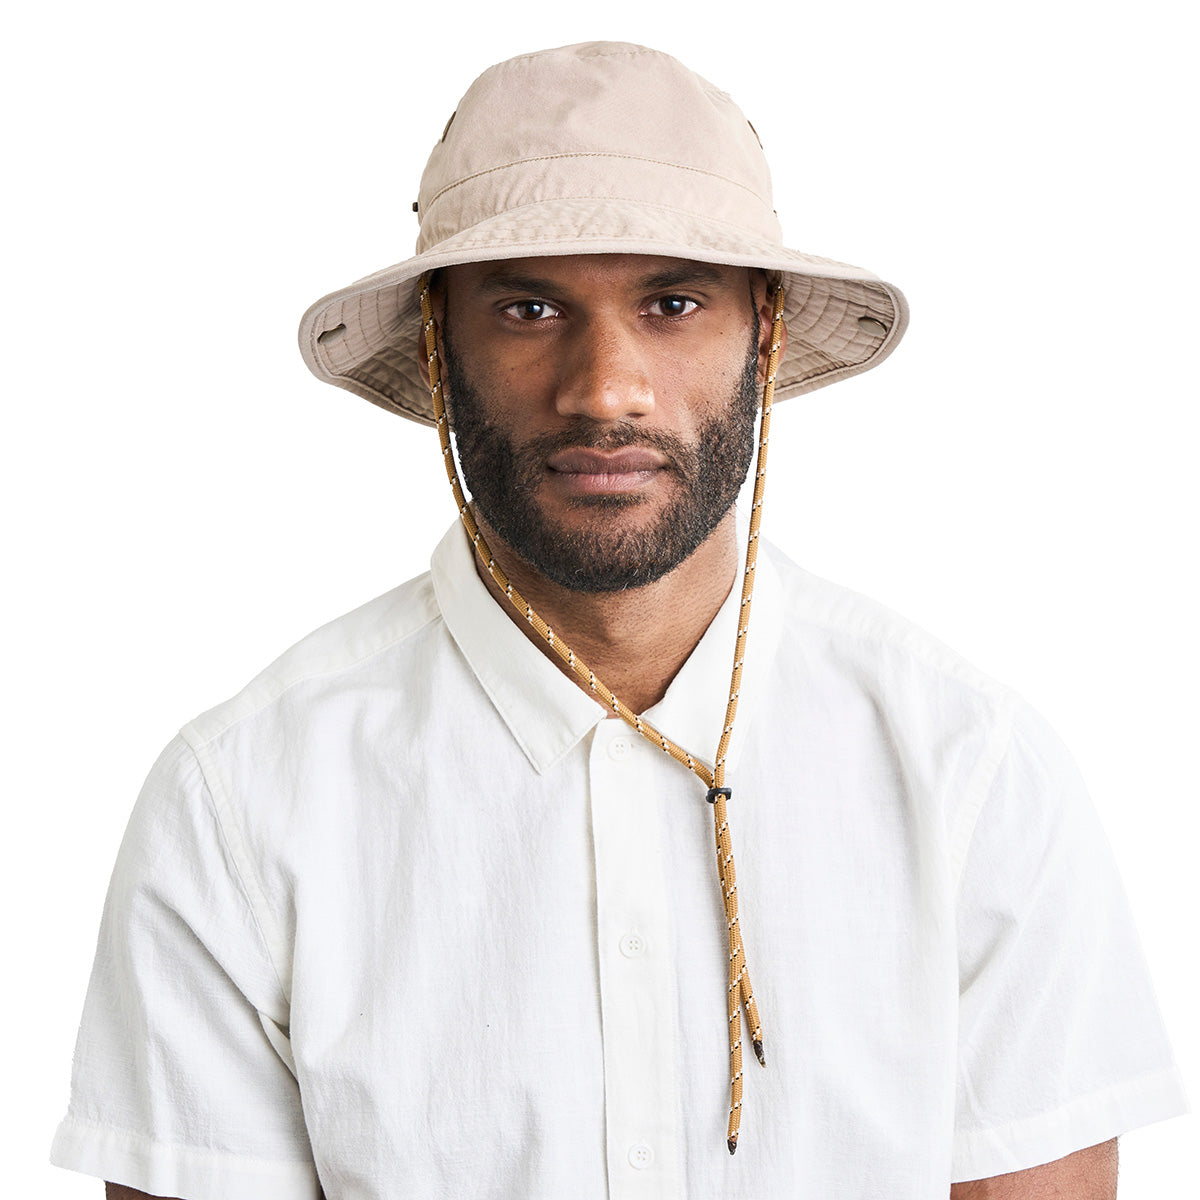 Altitude Forester Bucket Hat CTR Style:1404